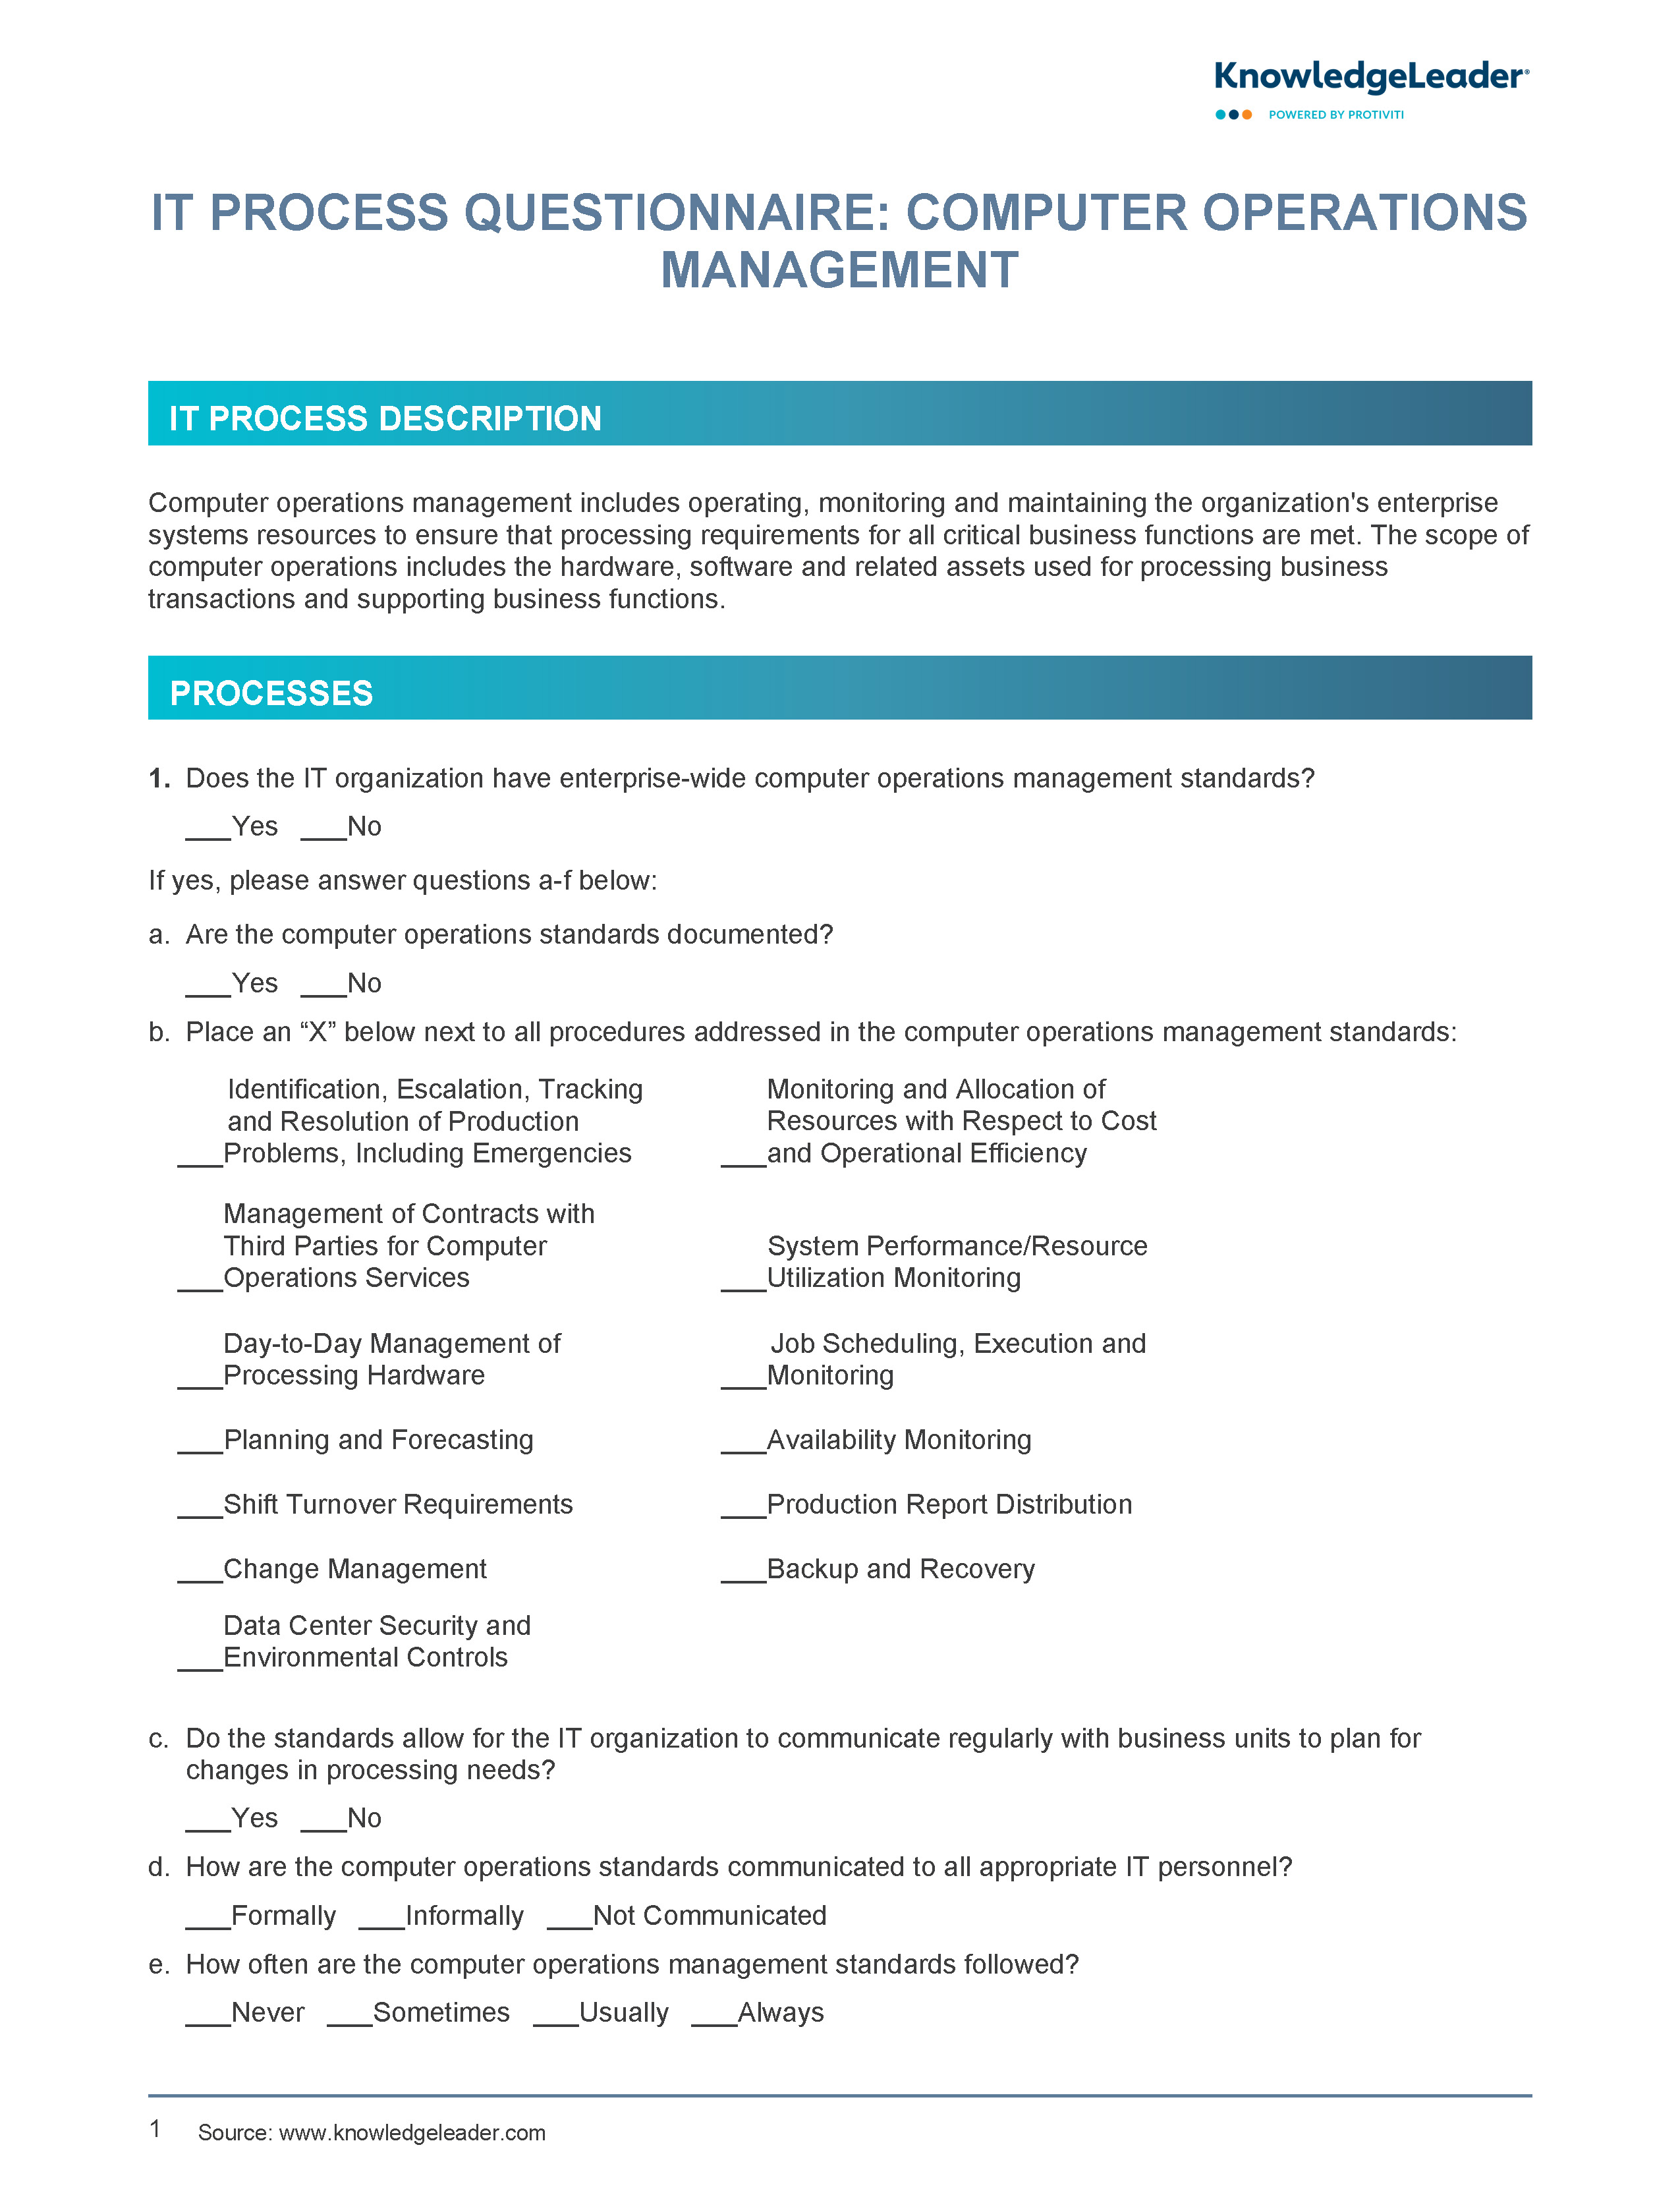 Screenshot of the first page of IT Process Questionnaire Computer Operations Management